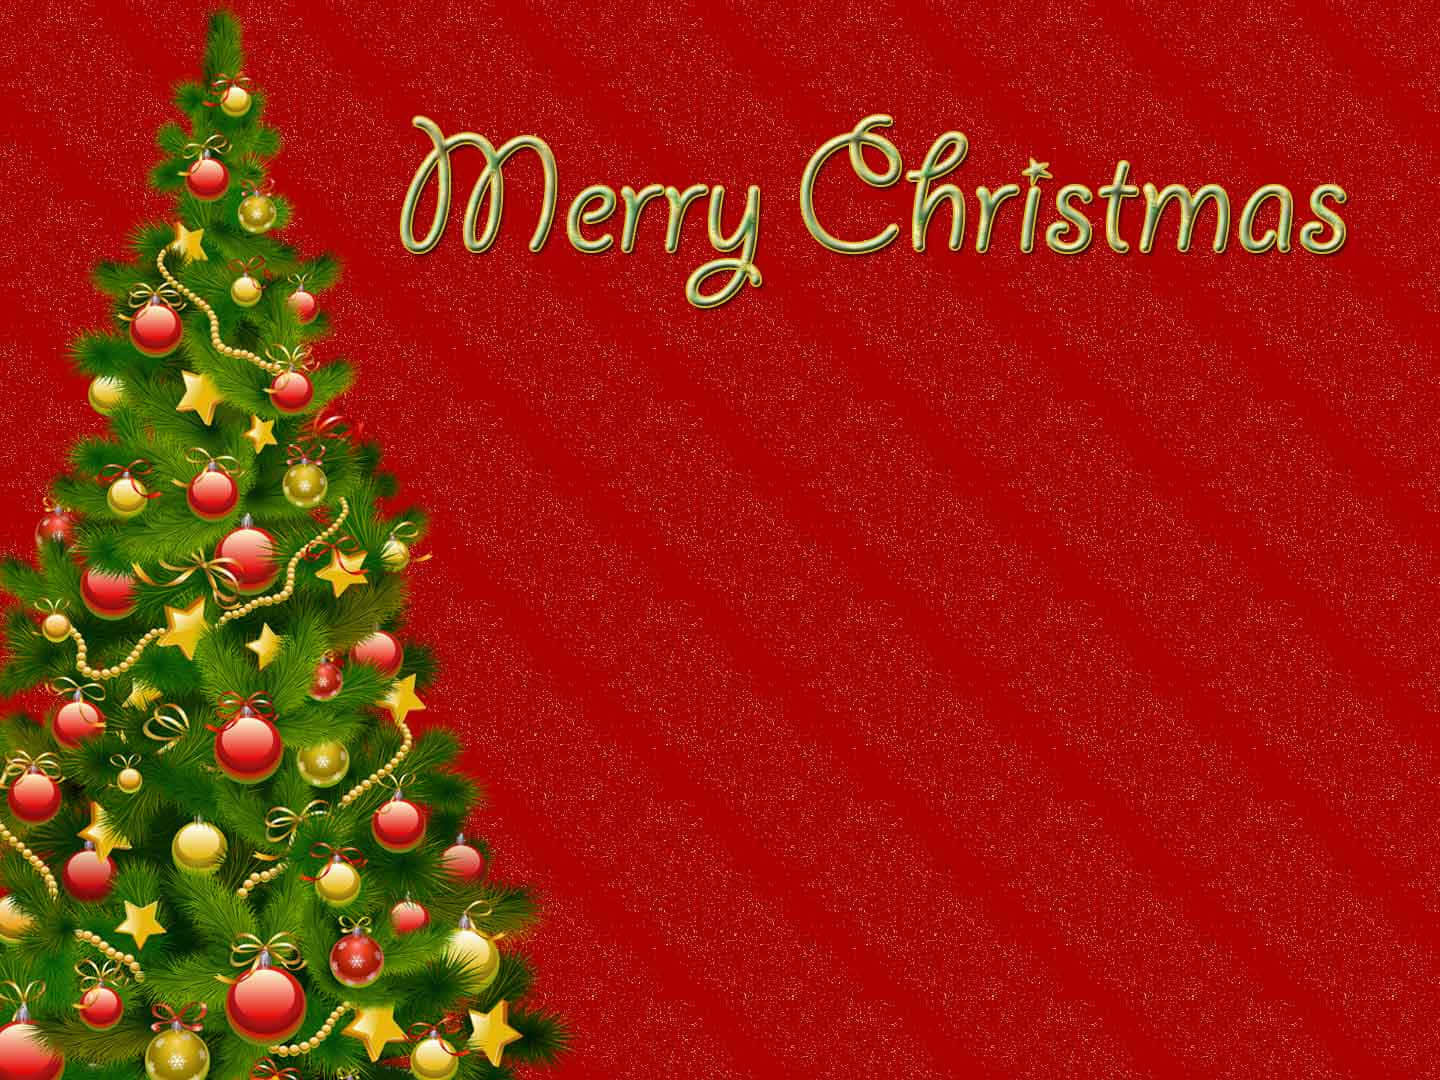 Celebrate the holiday season with this festive red Christmas background